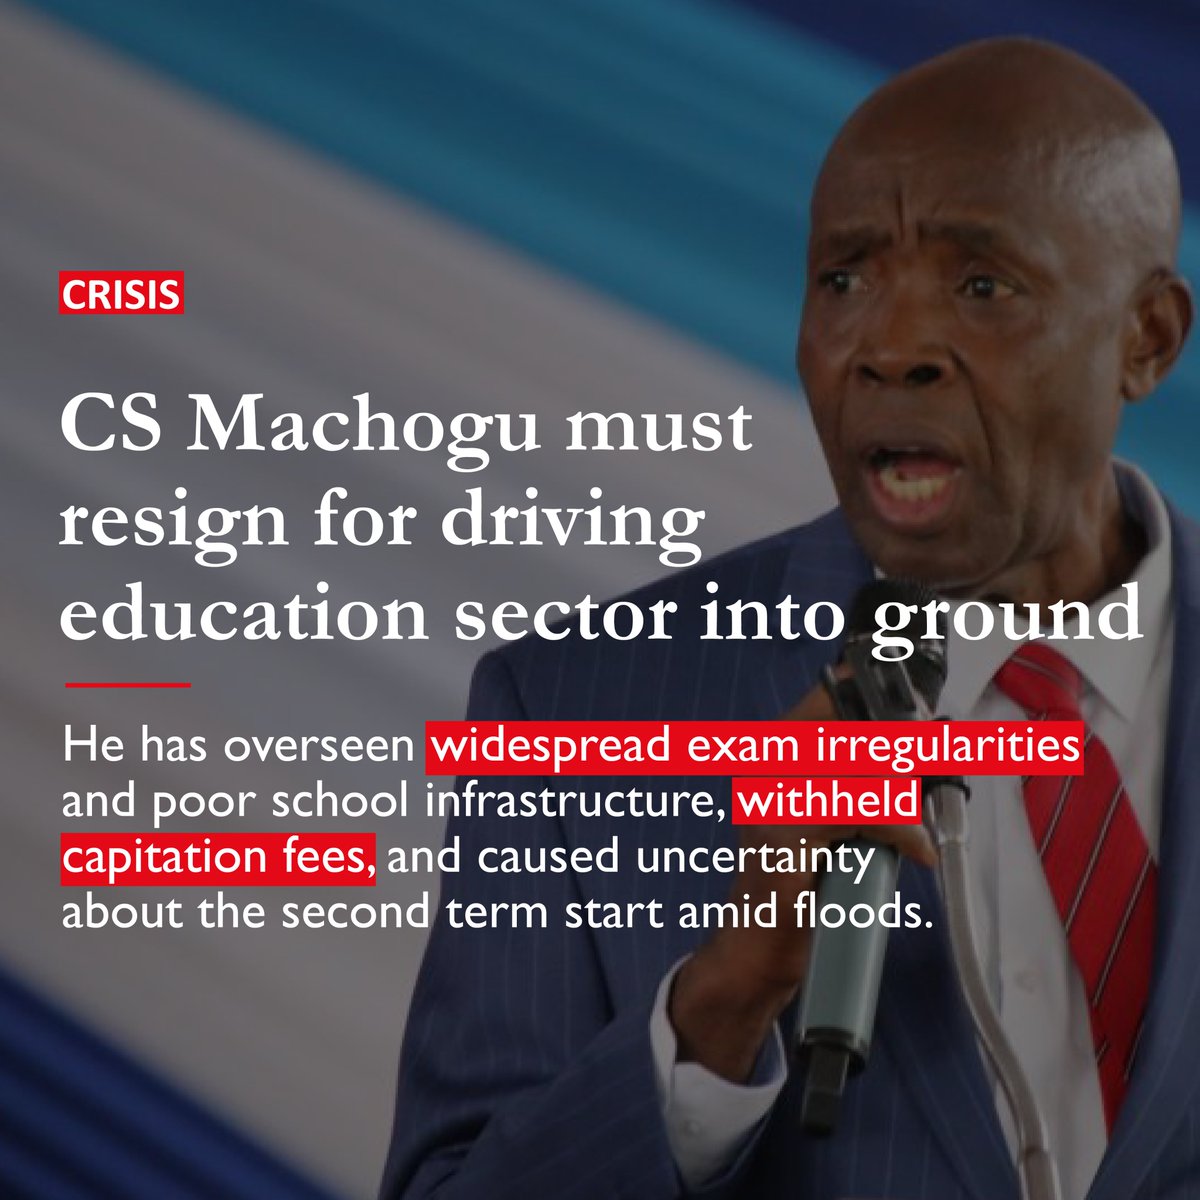 #Statement Kenya's education system is in crisis and Education CS Ezekiel Machogu is “overworking” to drive it into the ground. Elimu Bora Working Group demands CS Machogu‘s resignation. Read More: shorturl.at/abyzW